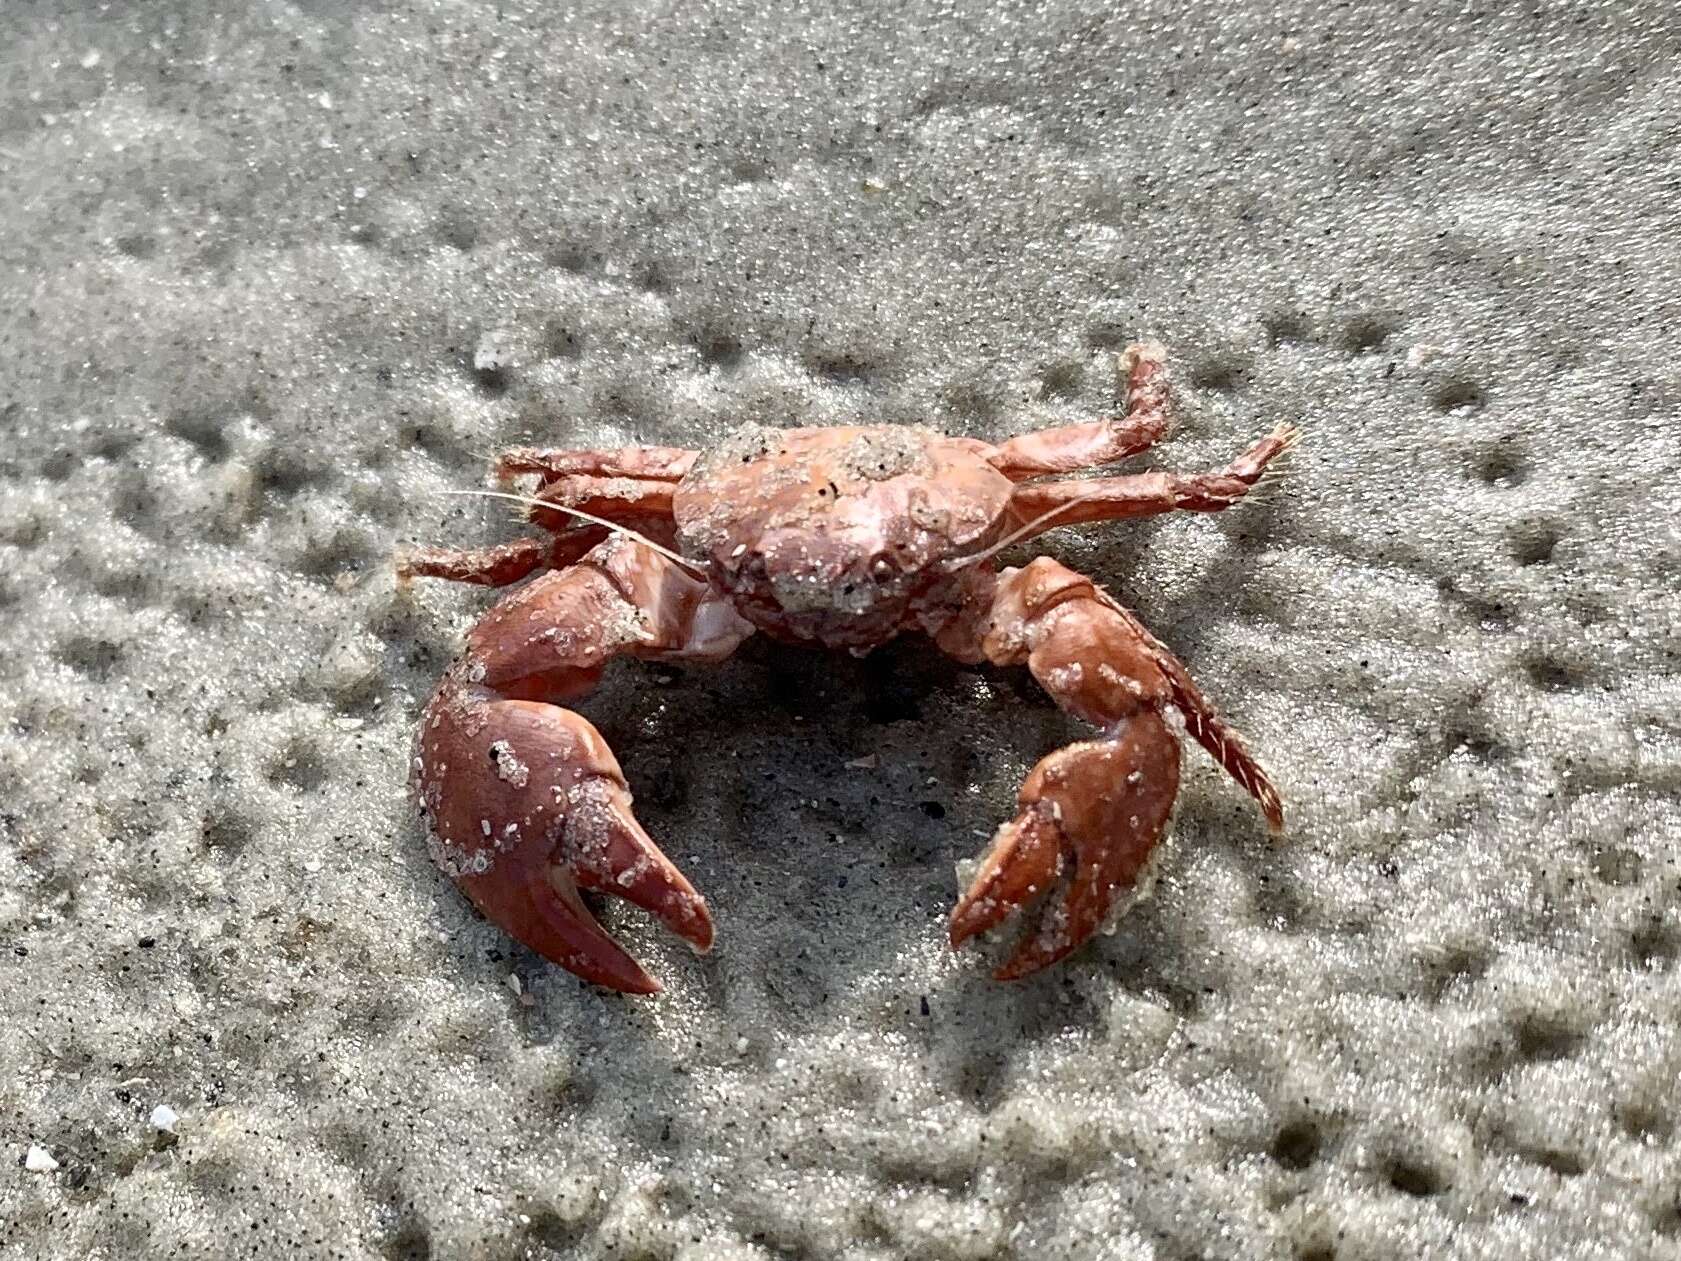 Image of spotted porcelain crab